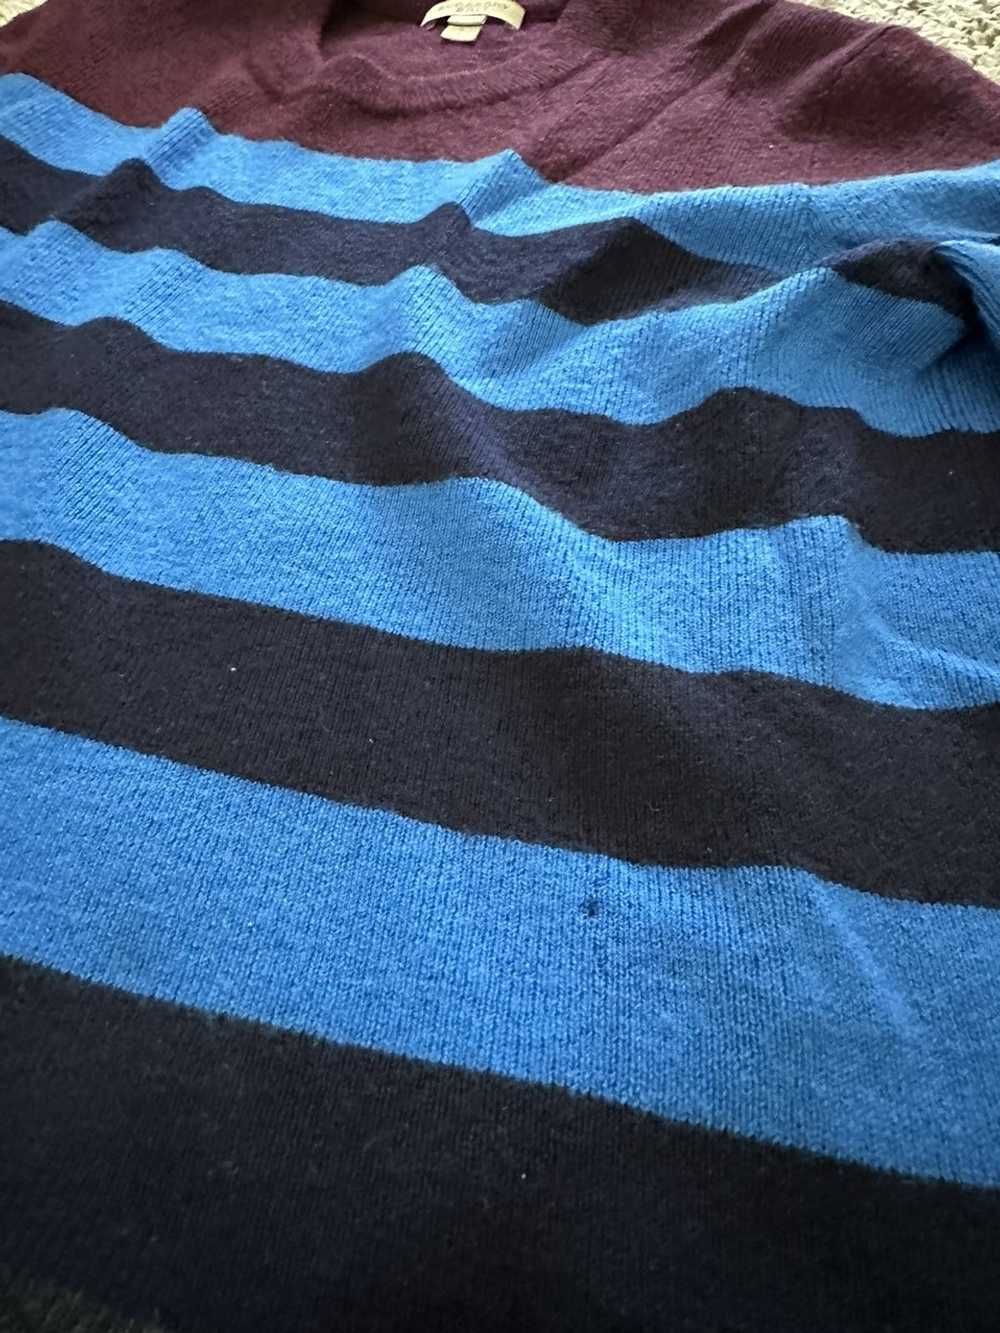 Burberry Burberry Brit Sweater Wool striped Small - image 3